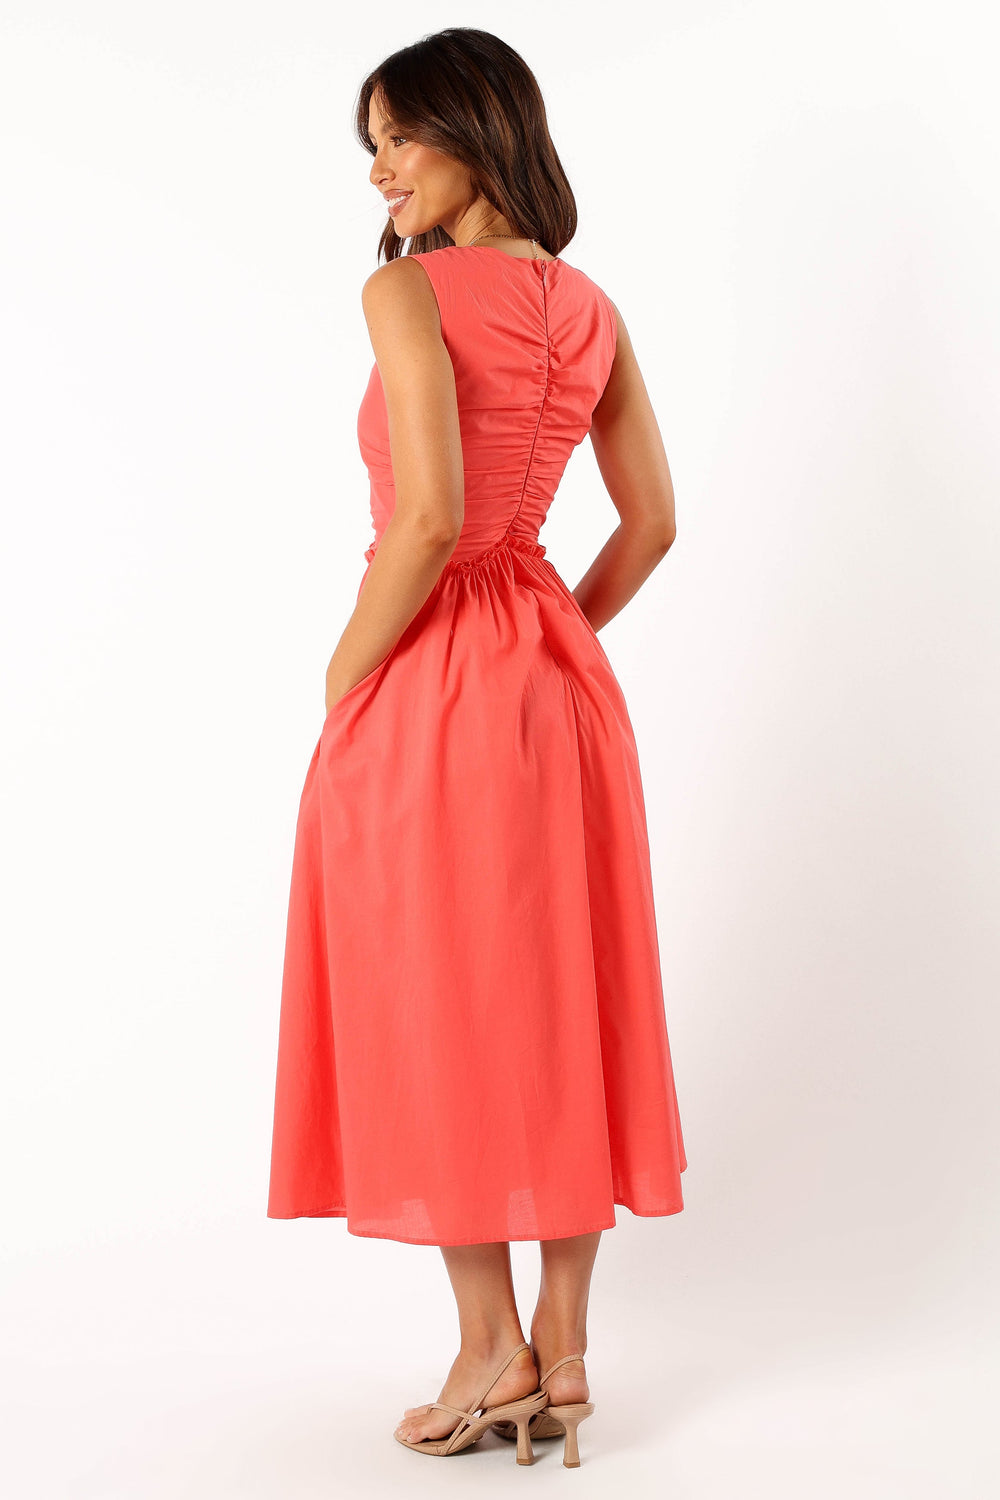 Petal and Pup USA DRESSES Violetta Ruched Midi Dress - Coral